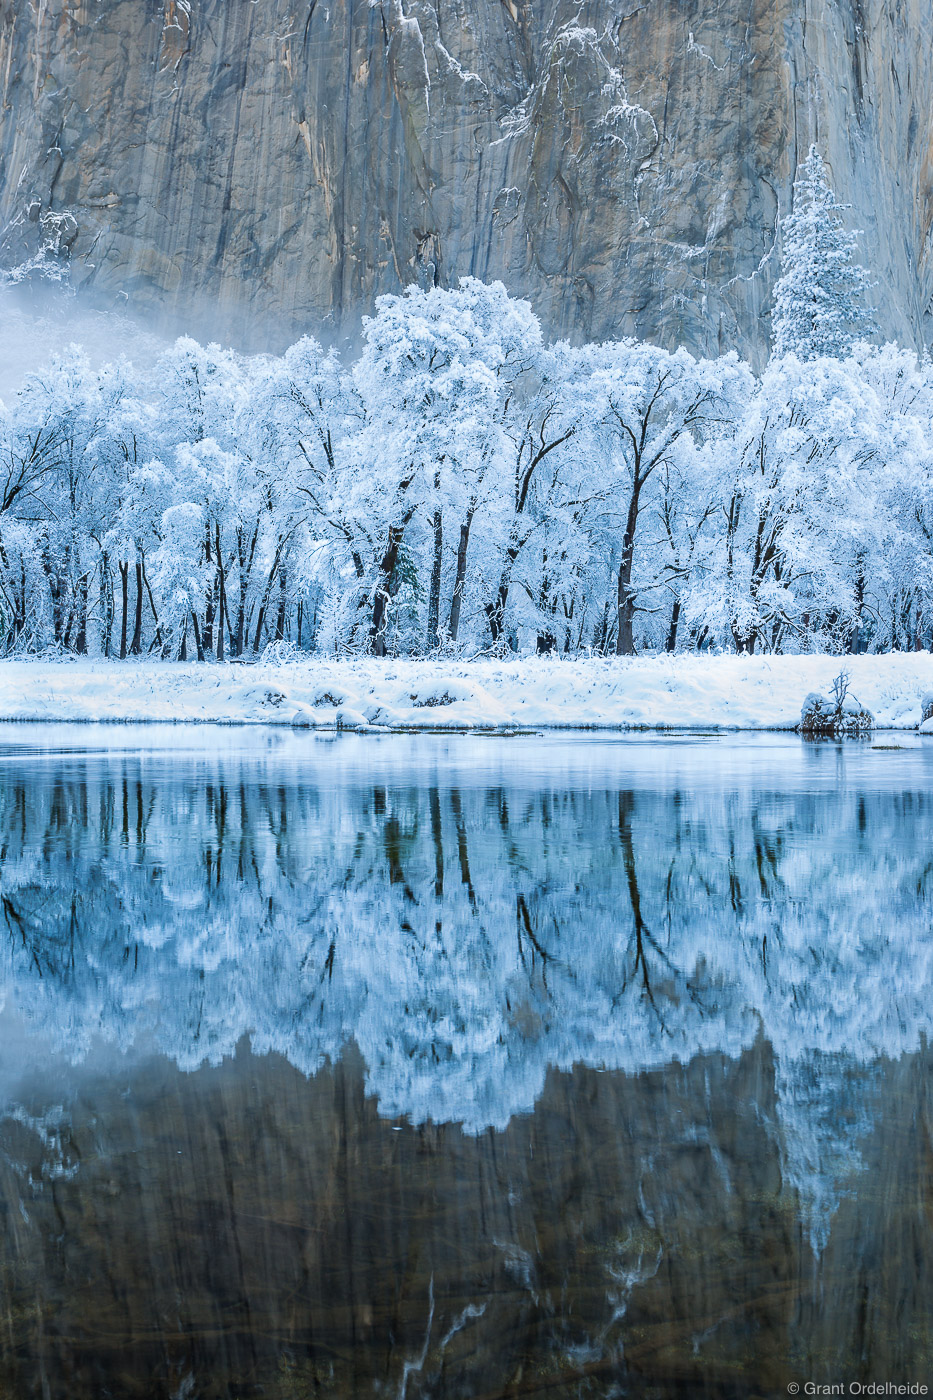 Frosted trees along the Merced River in Yosemite Valley.